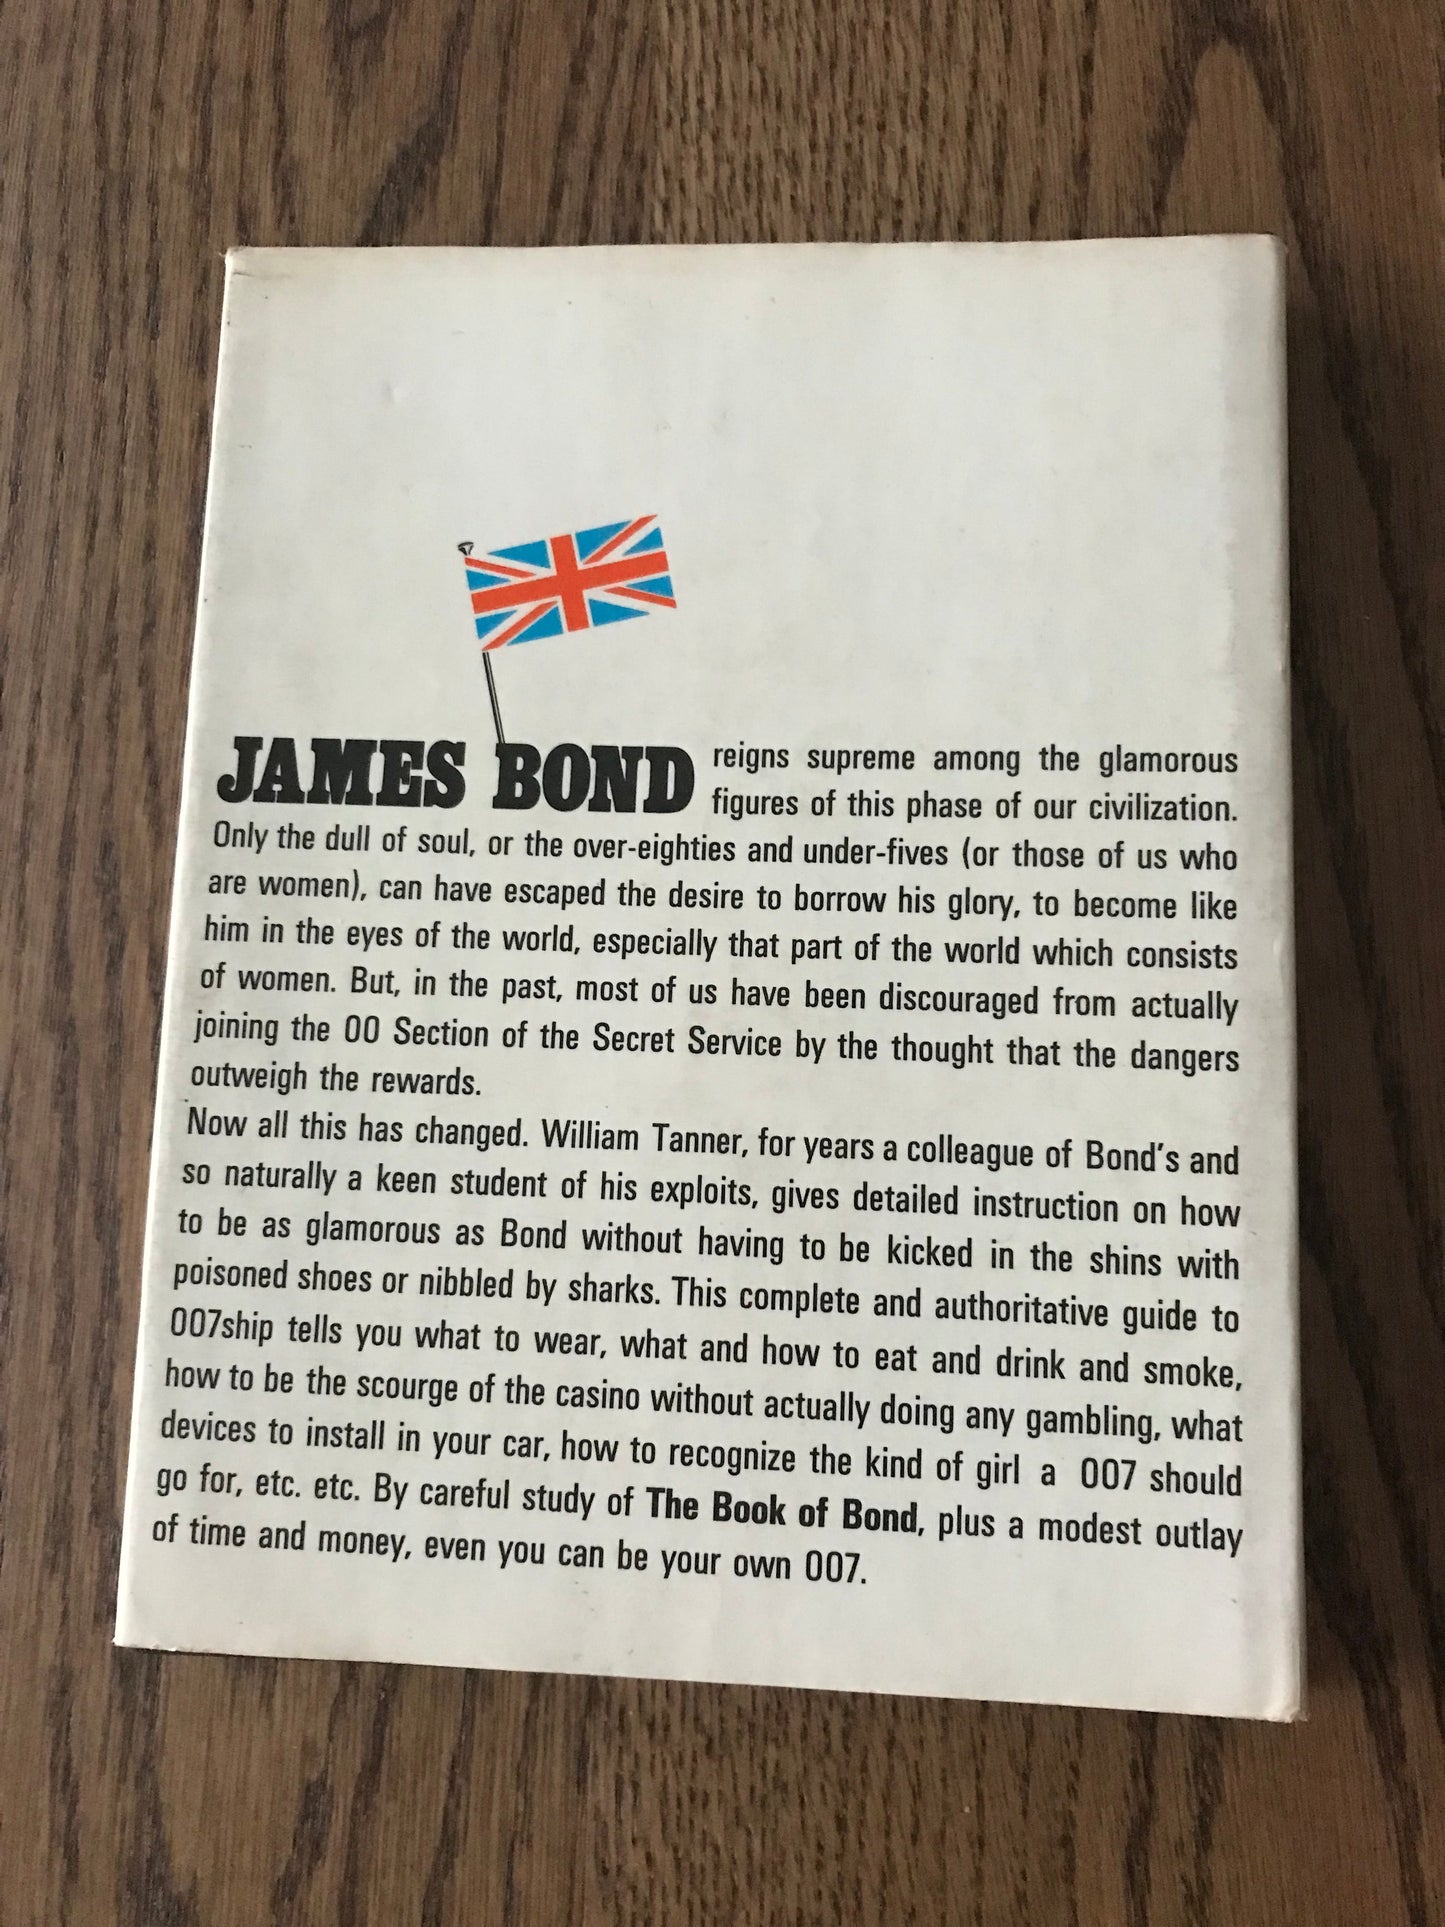 THE BOOK OF BOND - BY LT.-COL. WILLIAM ('BILL') TANNER BooksCardsNBikes